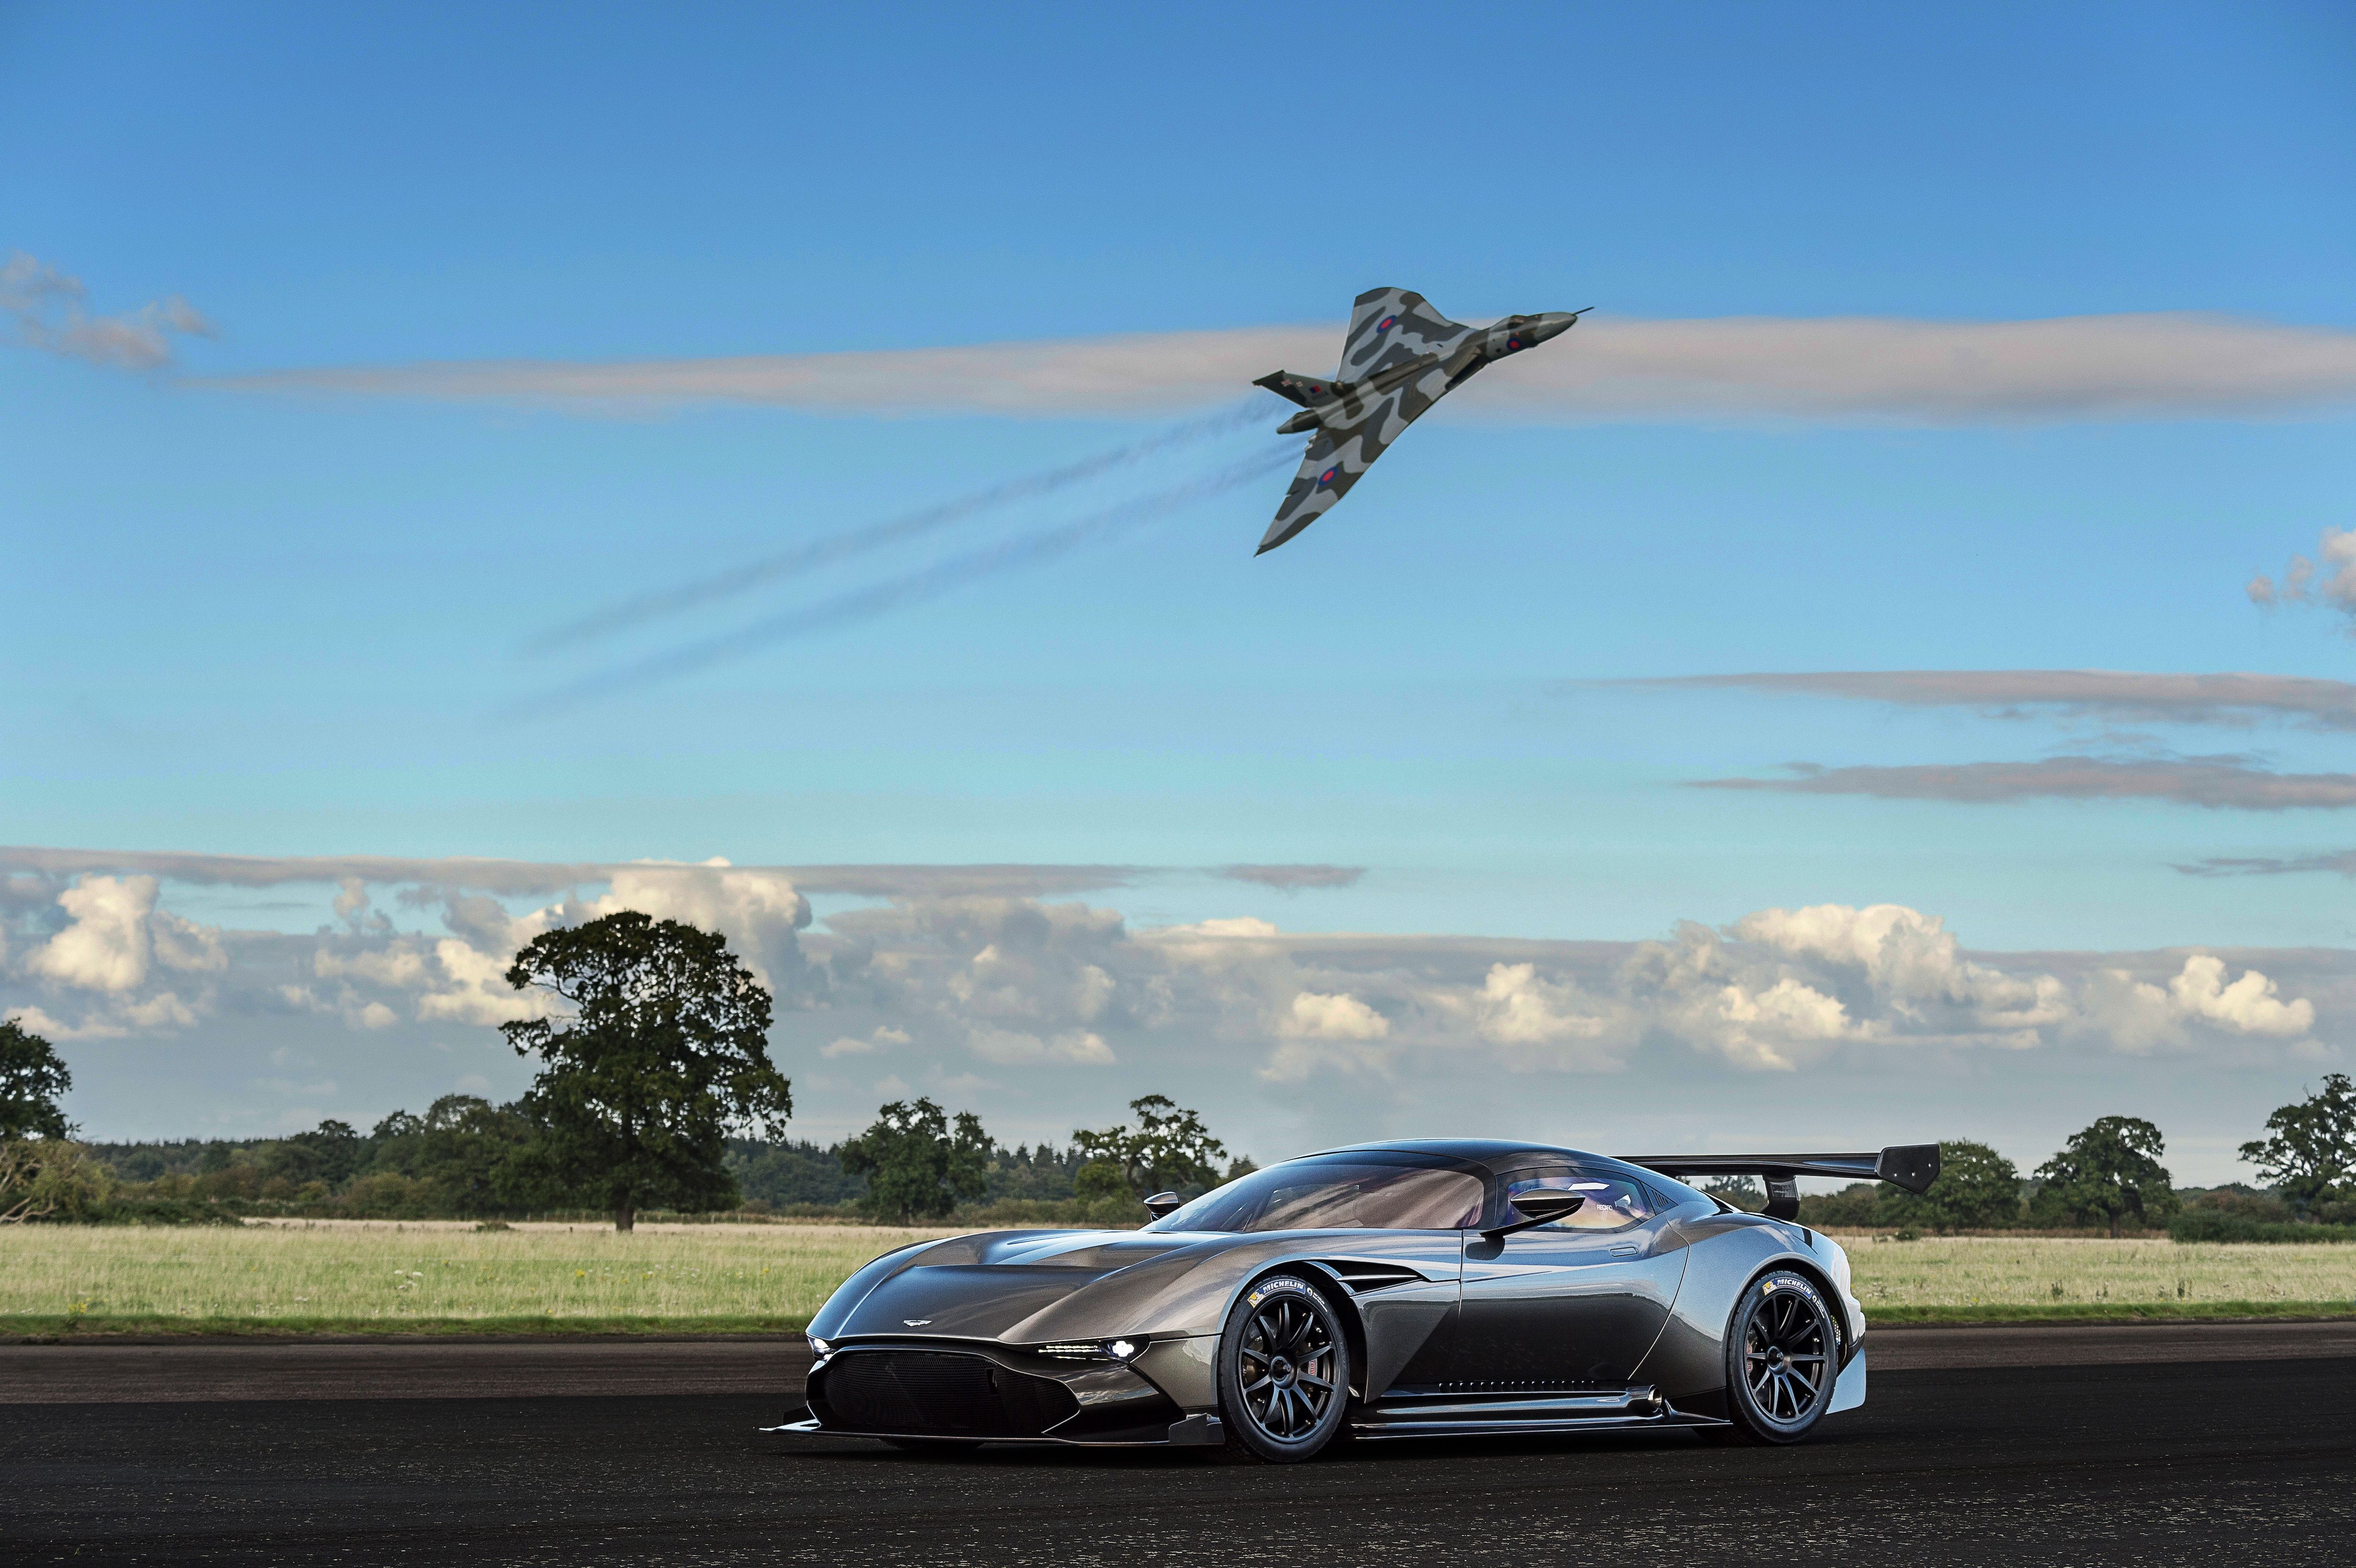 Your Ridiculously Awesome Aston Martin Vulcan Wallpaper Is Here